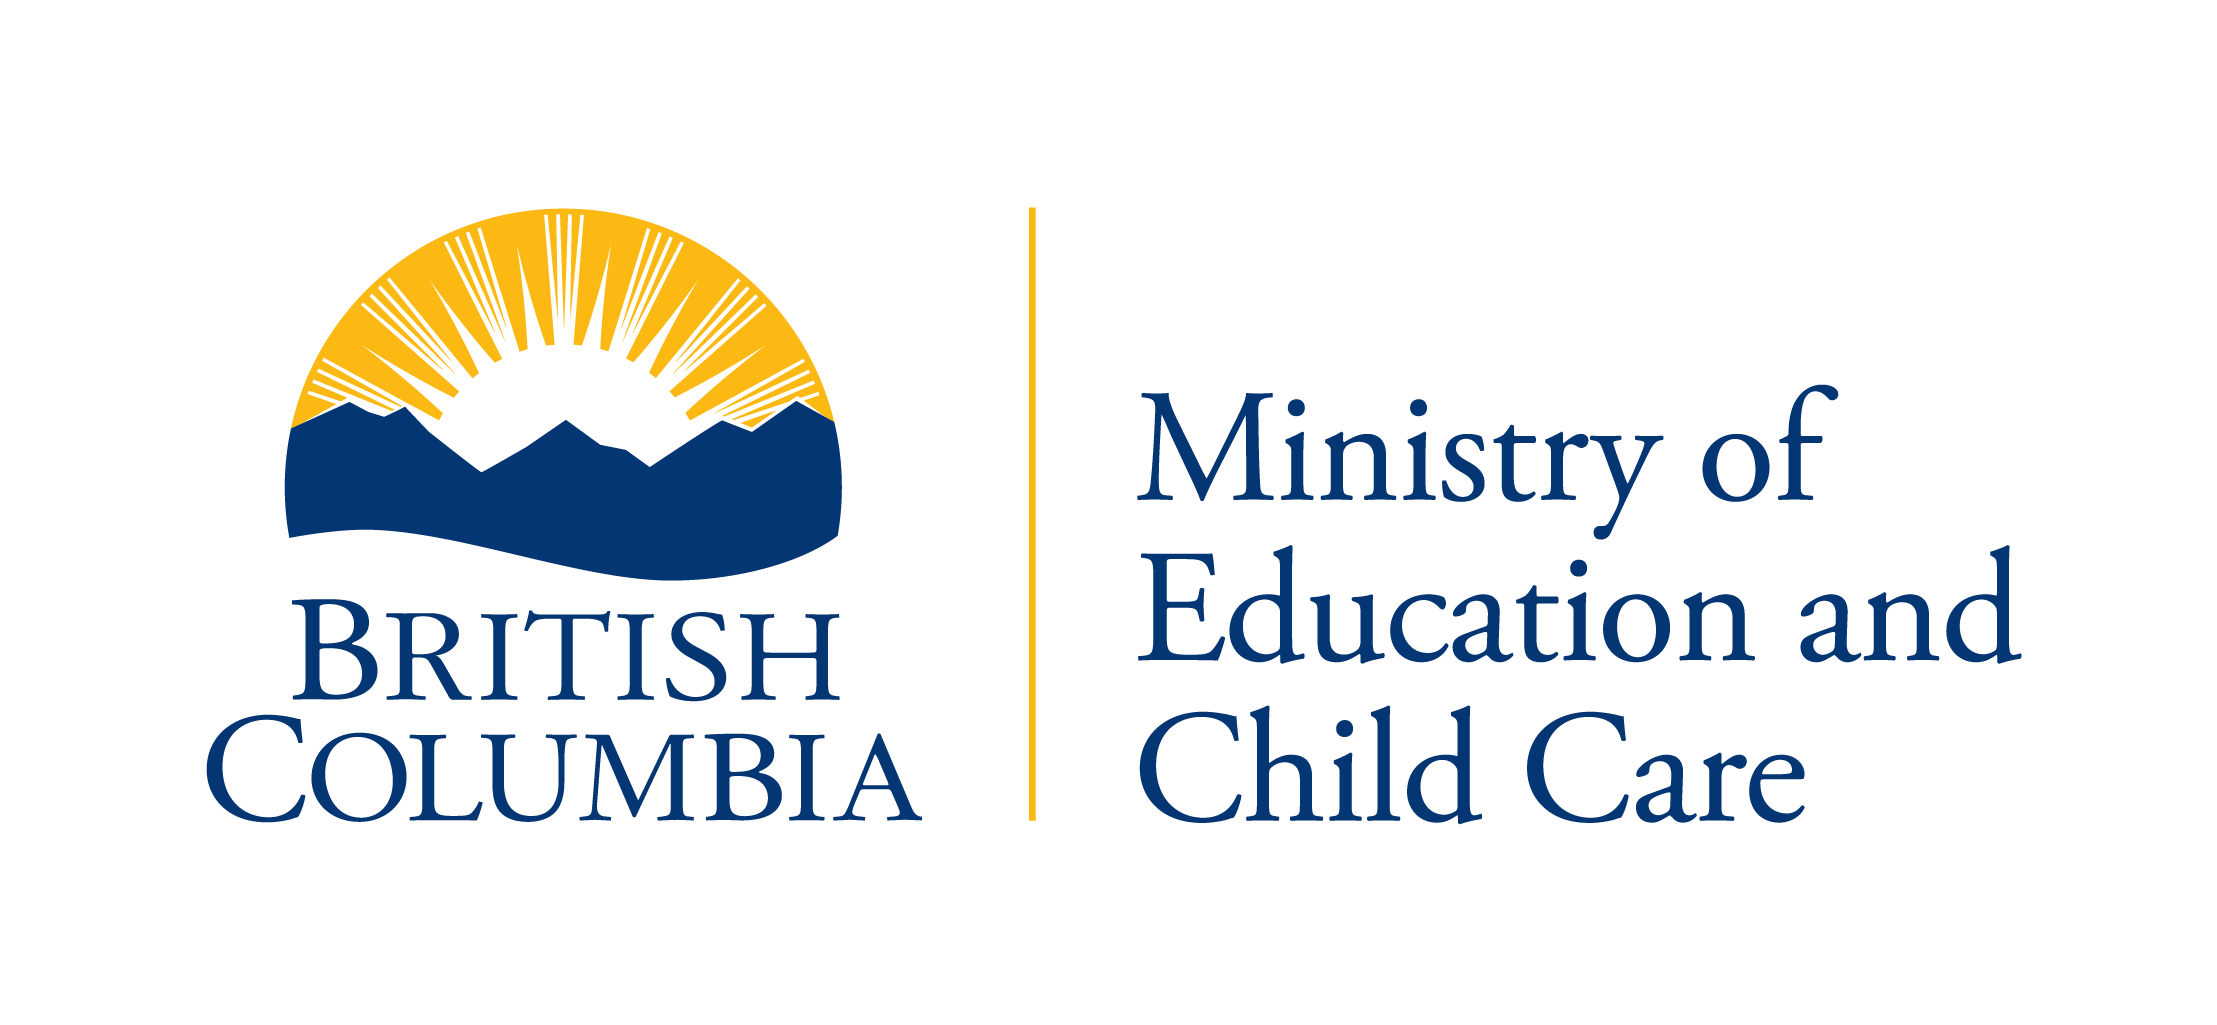 Ministry of Education and Child Care